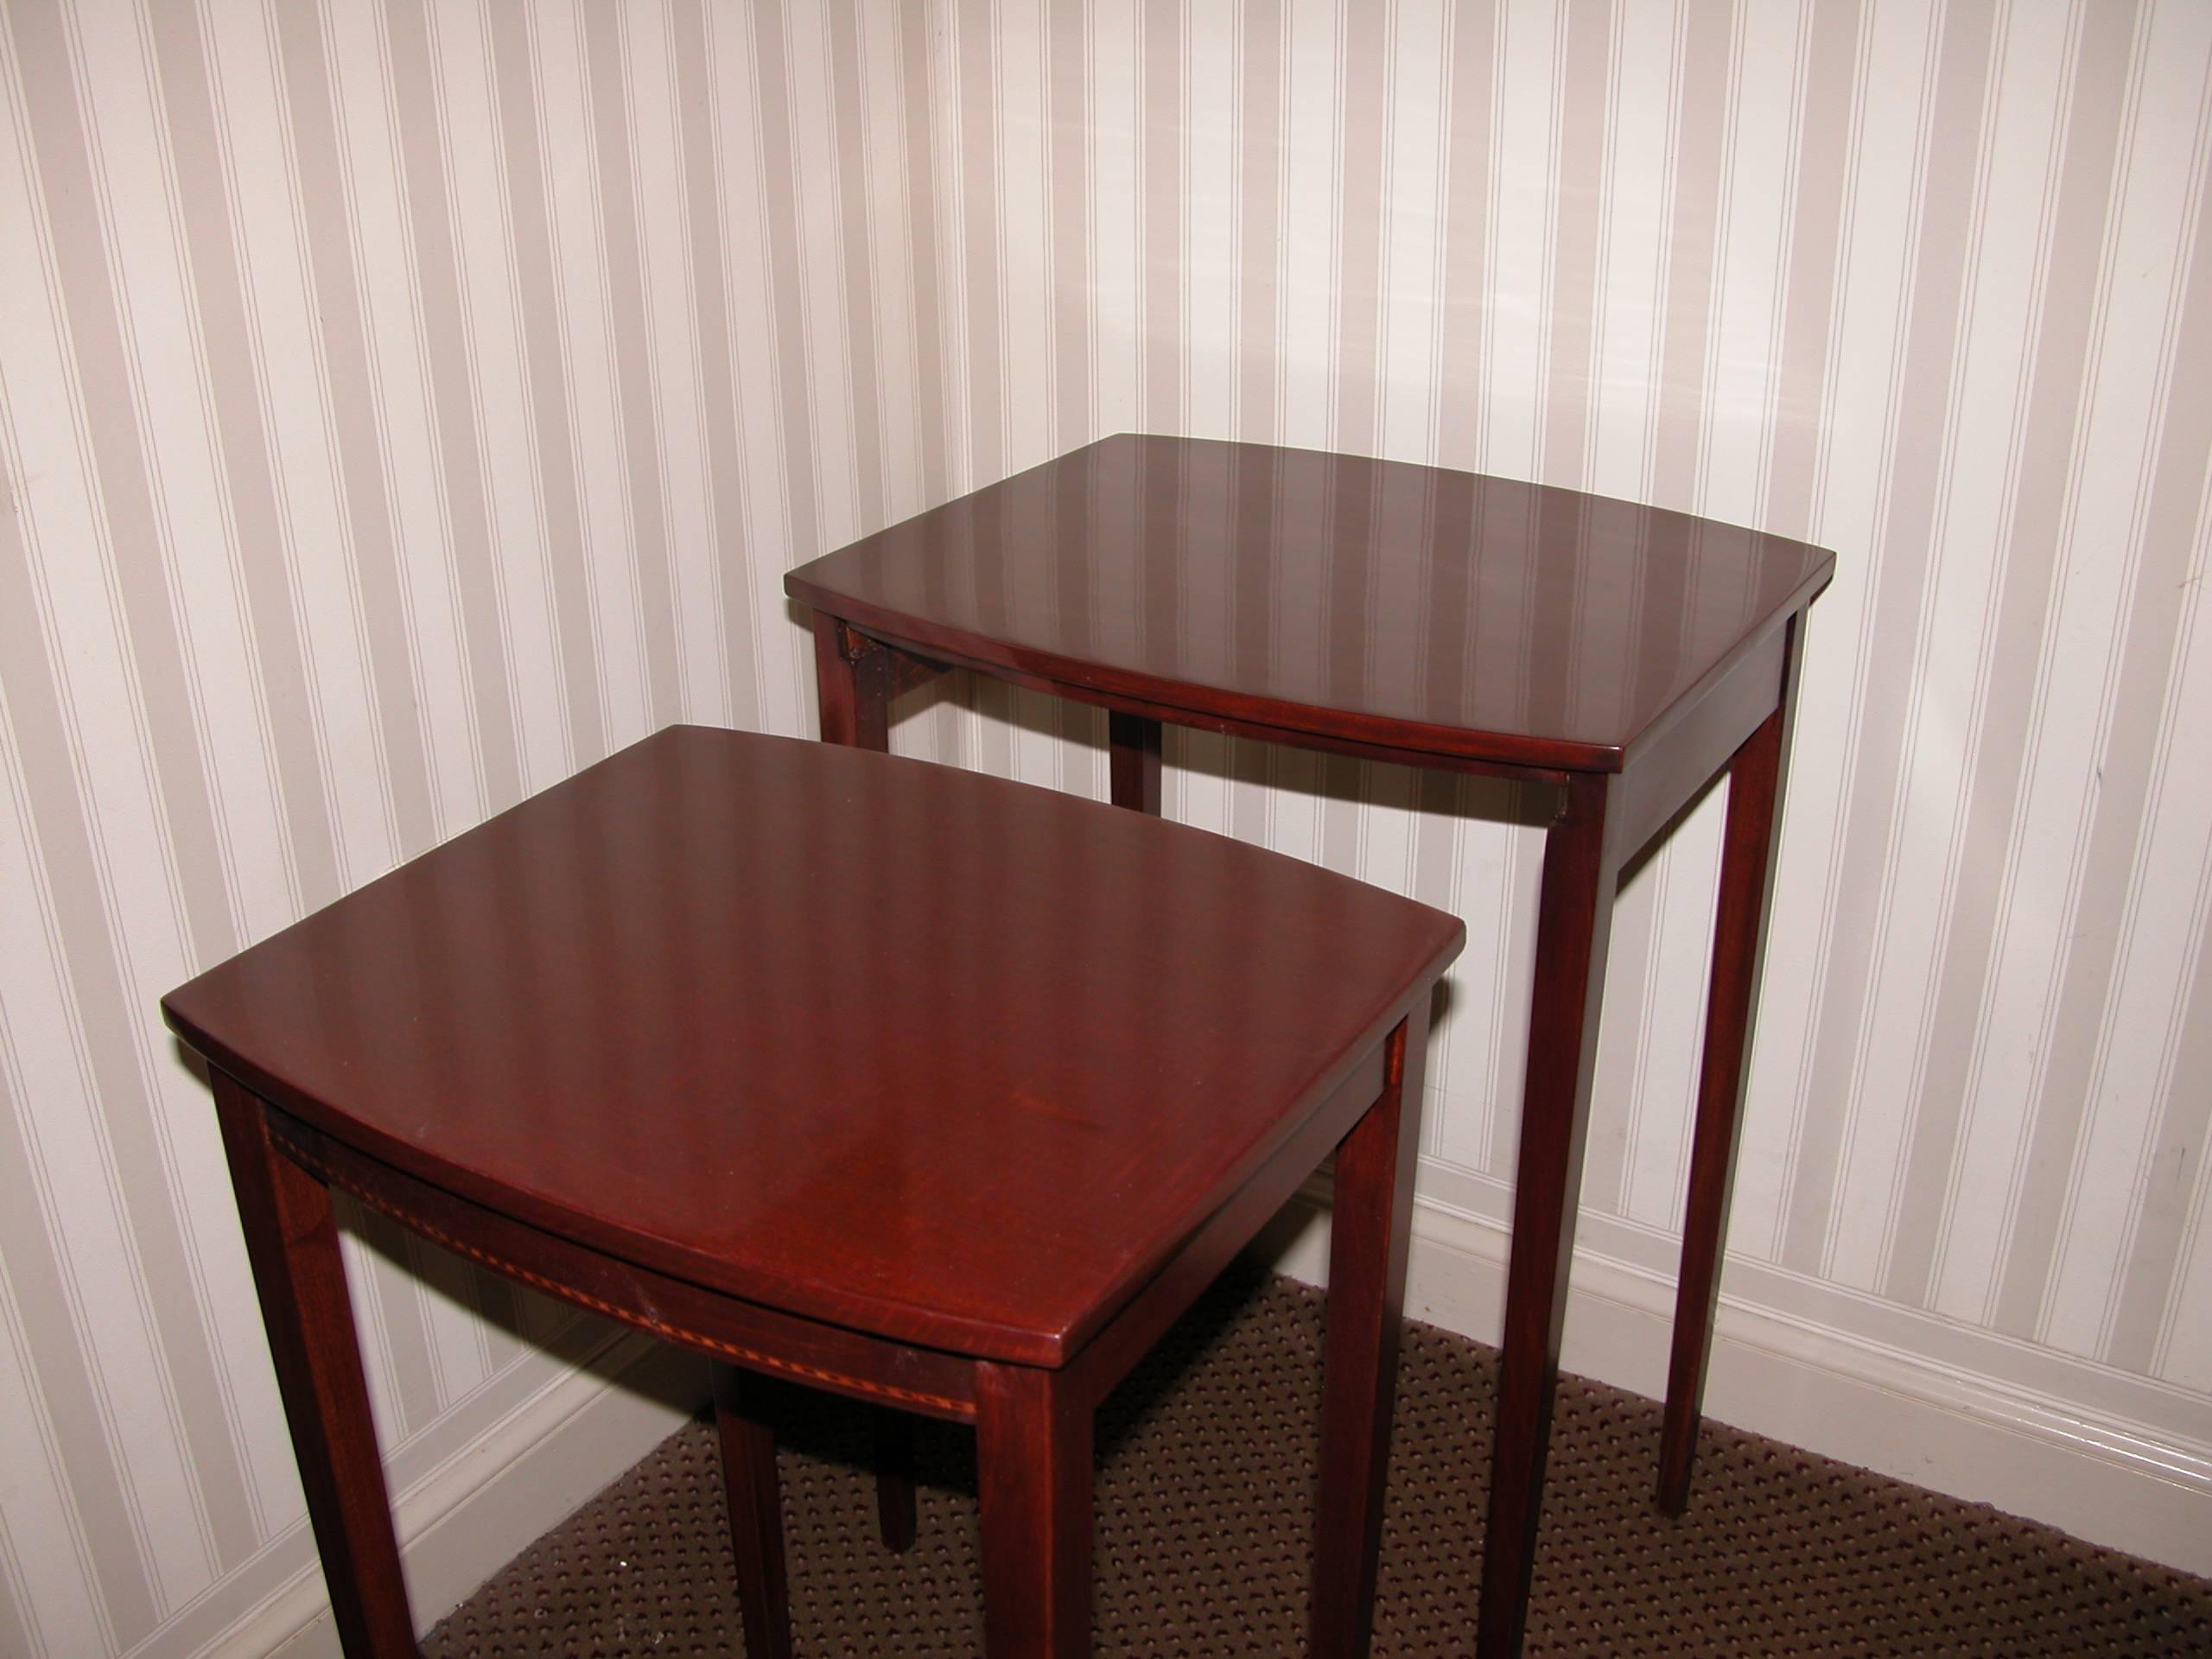 American Early 20th Century Mahogany Nest of Three Tables by Mersman Furniture